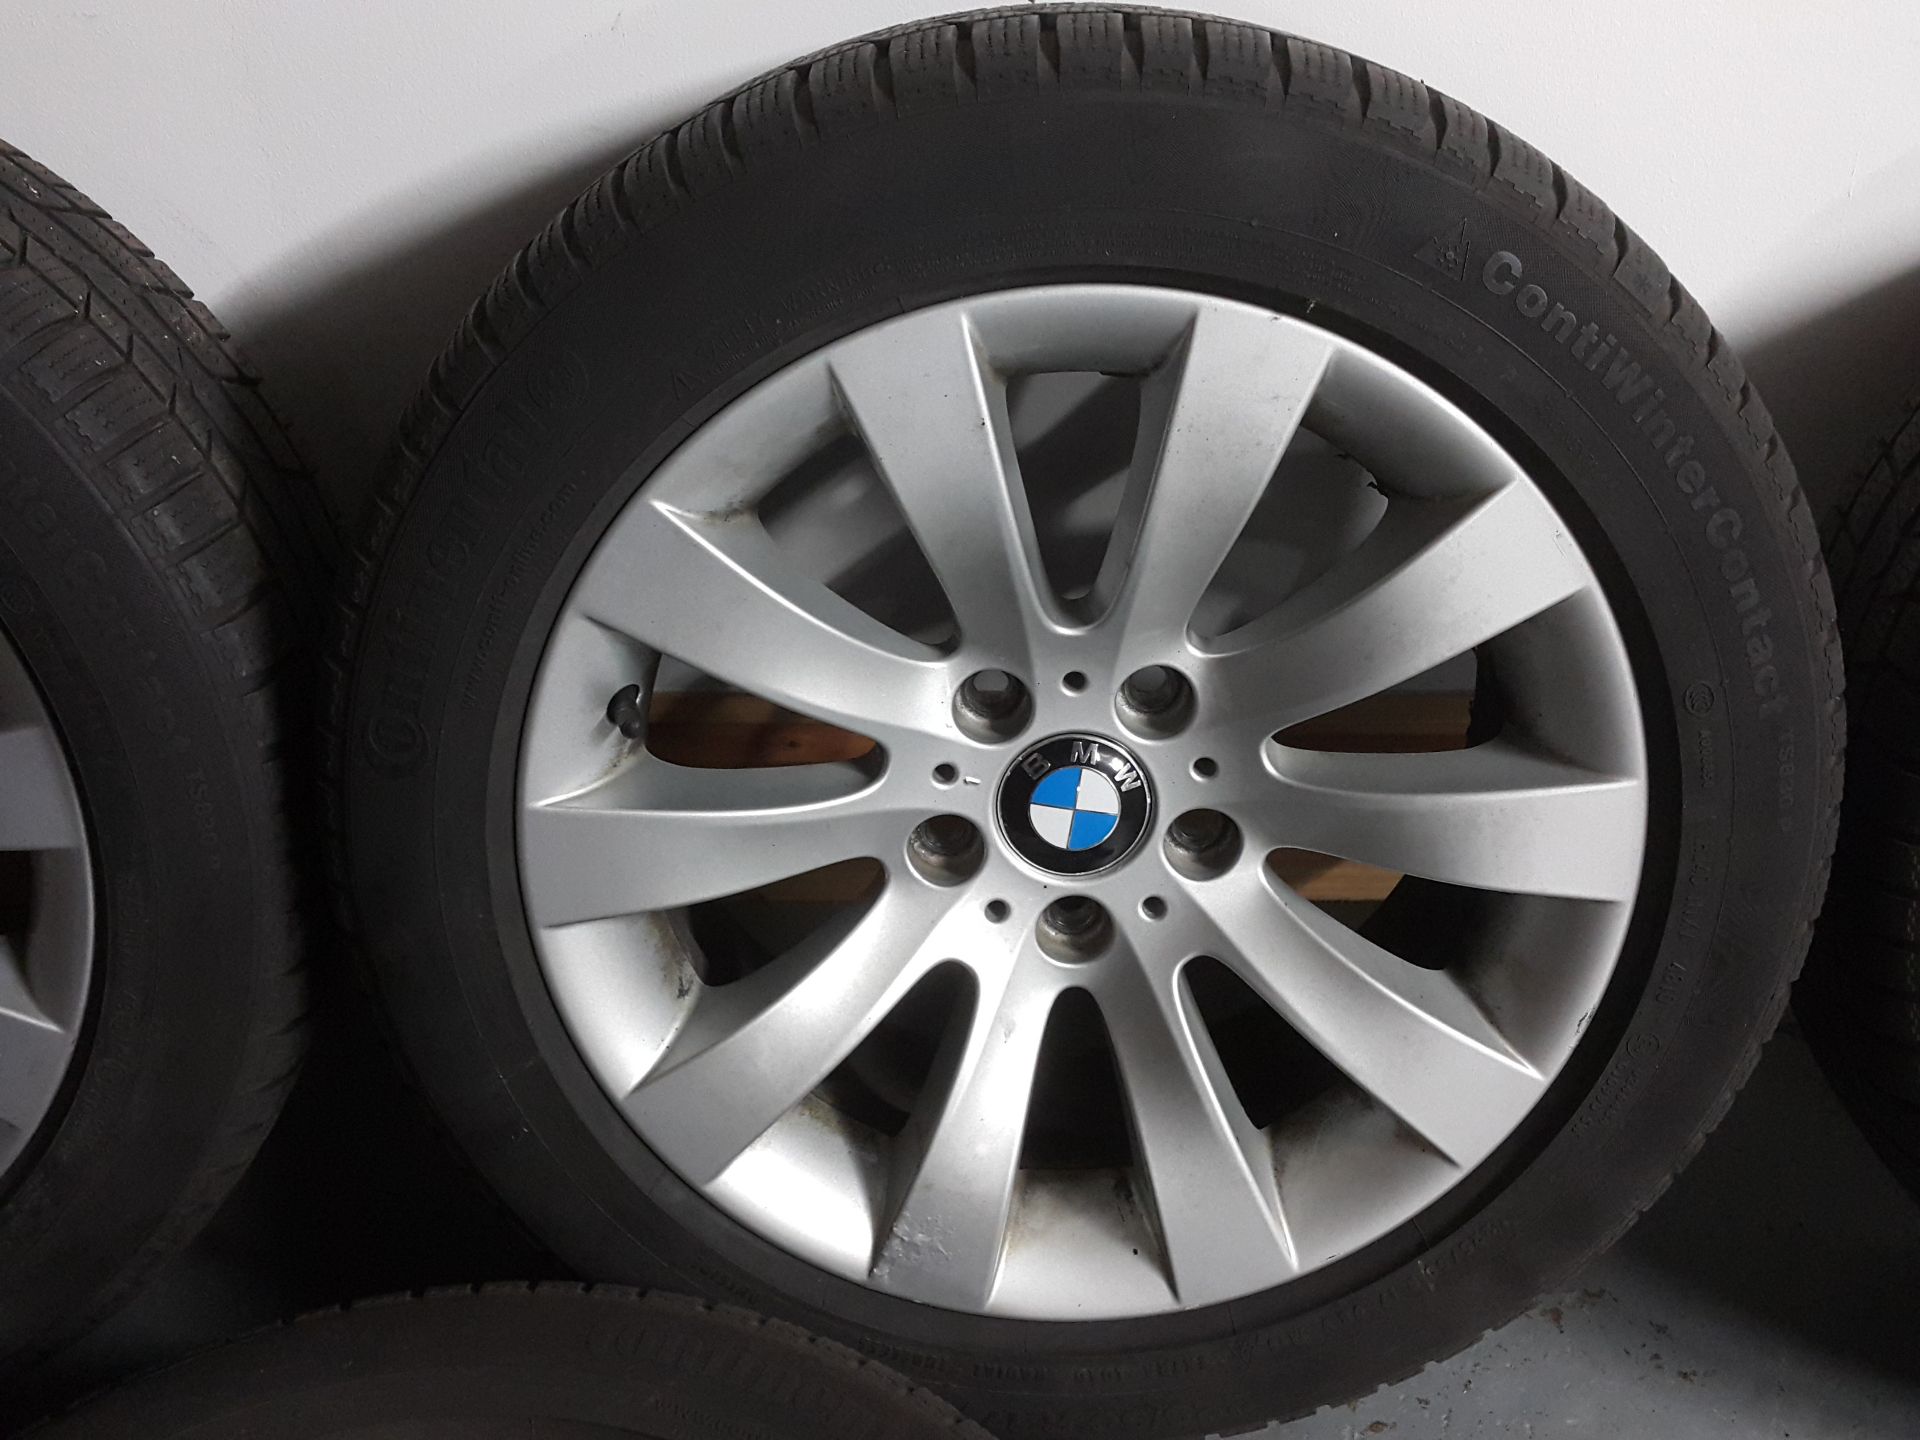 4 X BMW 5 SERIES 17" ALLOY WHEELS WITH CONTINENTAL CONTIWINTER CONTACT WINTER TYRES 225/55/R17 - Image 4 of 9